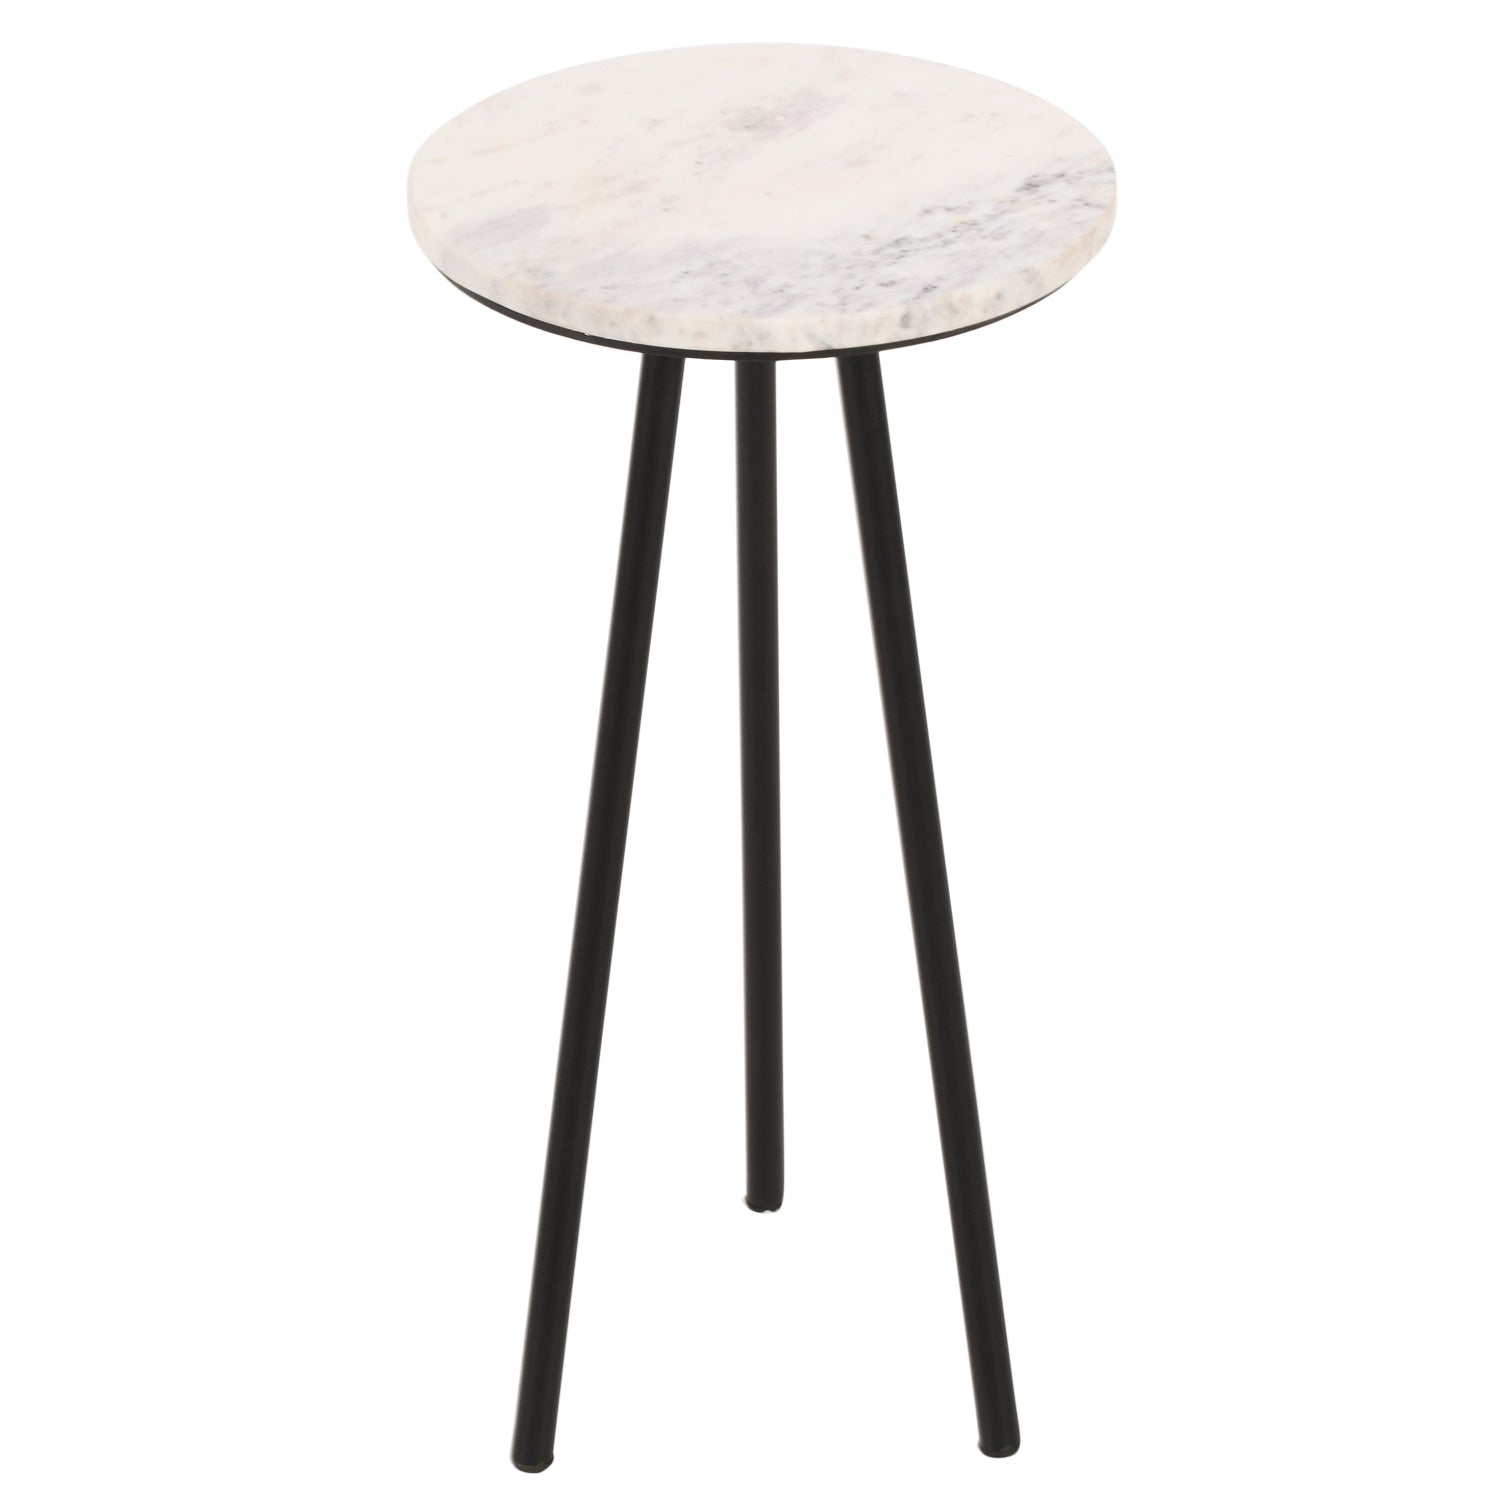 Opal Side Table With White Marble Top & Metal Legs